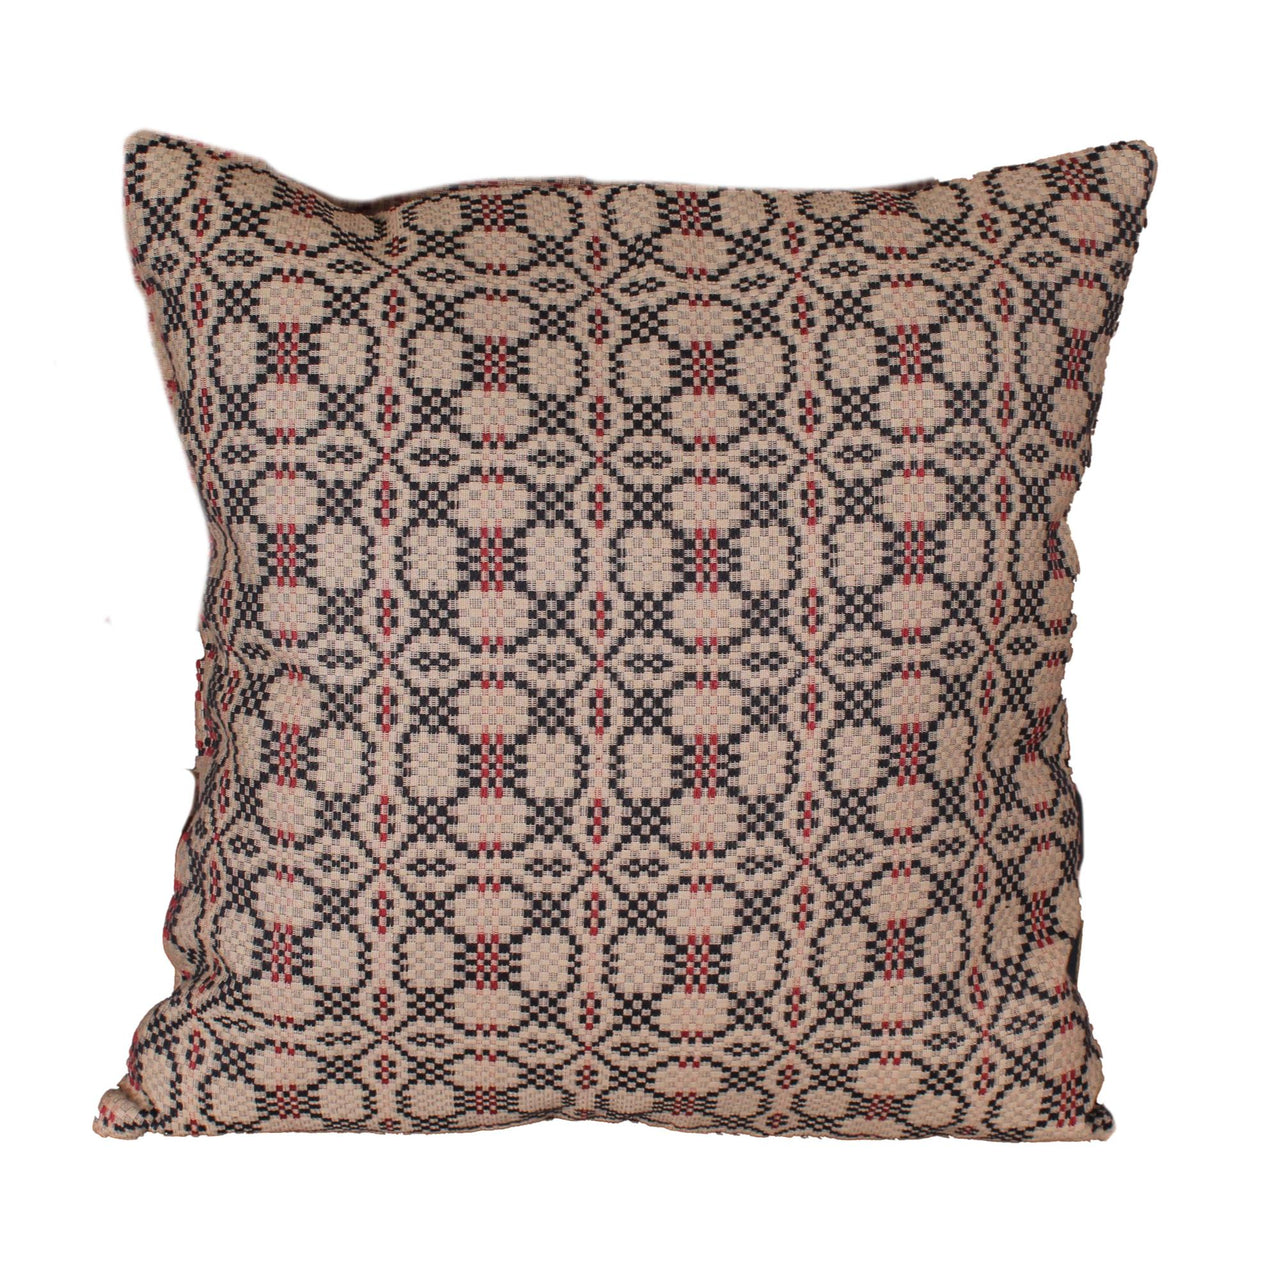 Kendall Jacquard Black Pillow Cover 18 In - Interiors by Elizabeth